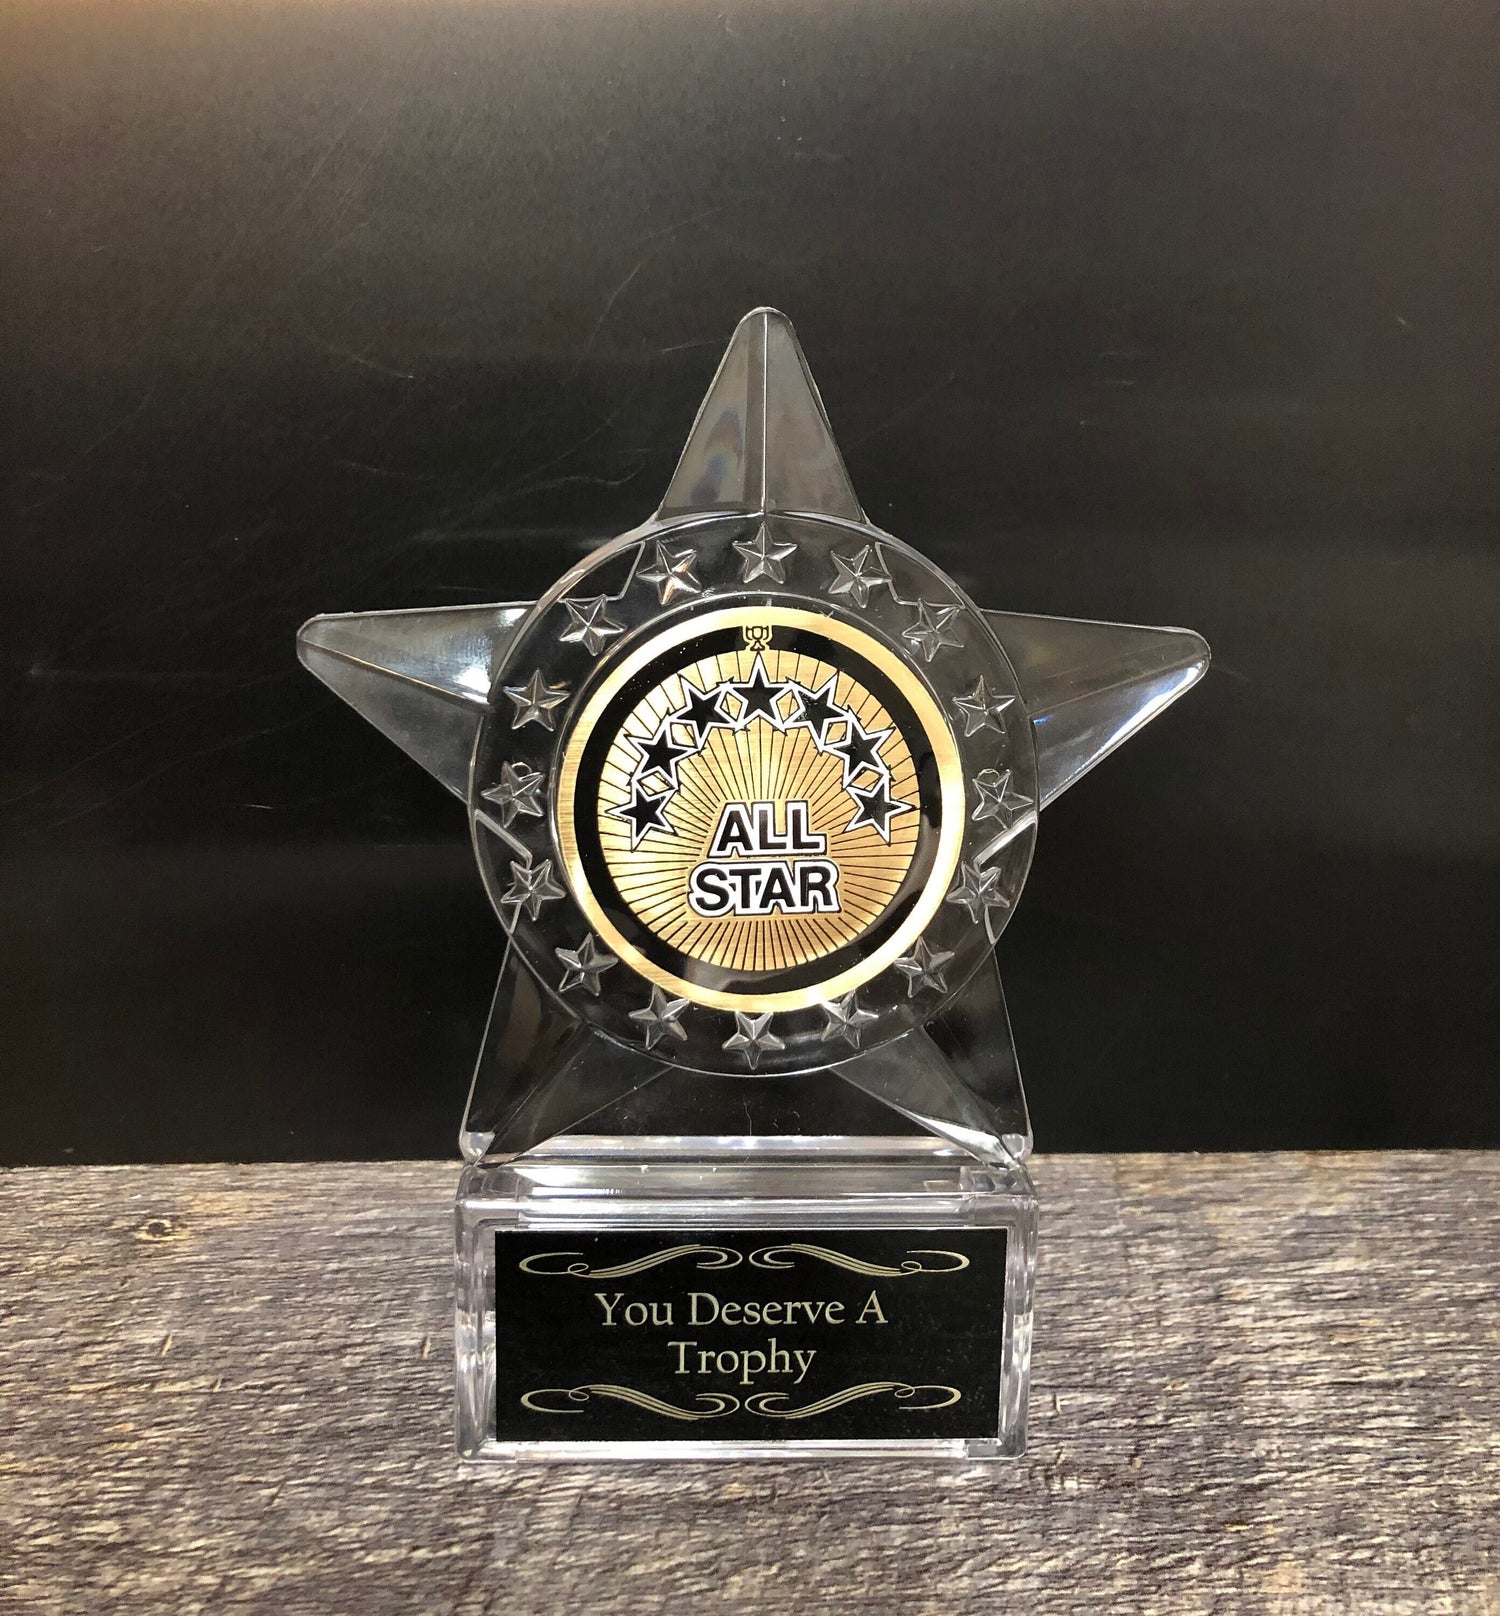 Perfect Attendance Award Mini Star Trophy Personalized You Deserve A Trophy Achievement Award Appreciation Award Employee of the Month